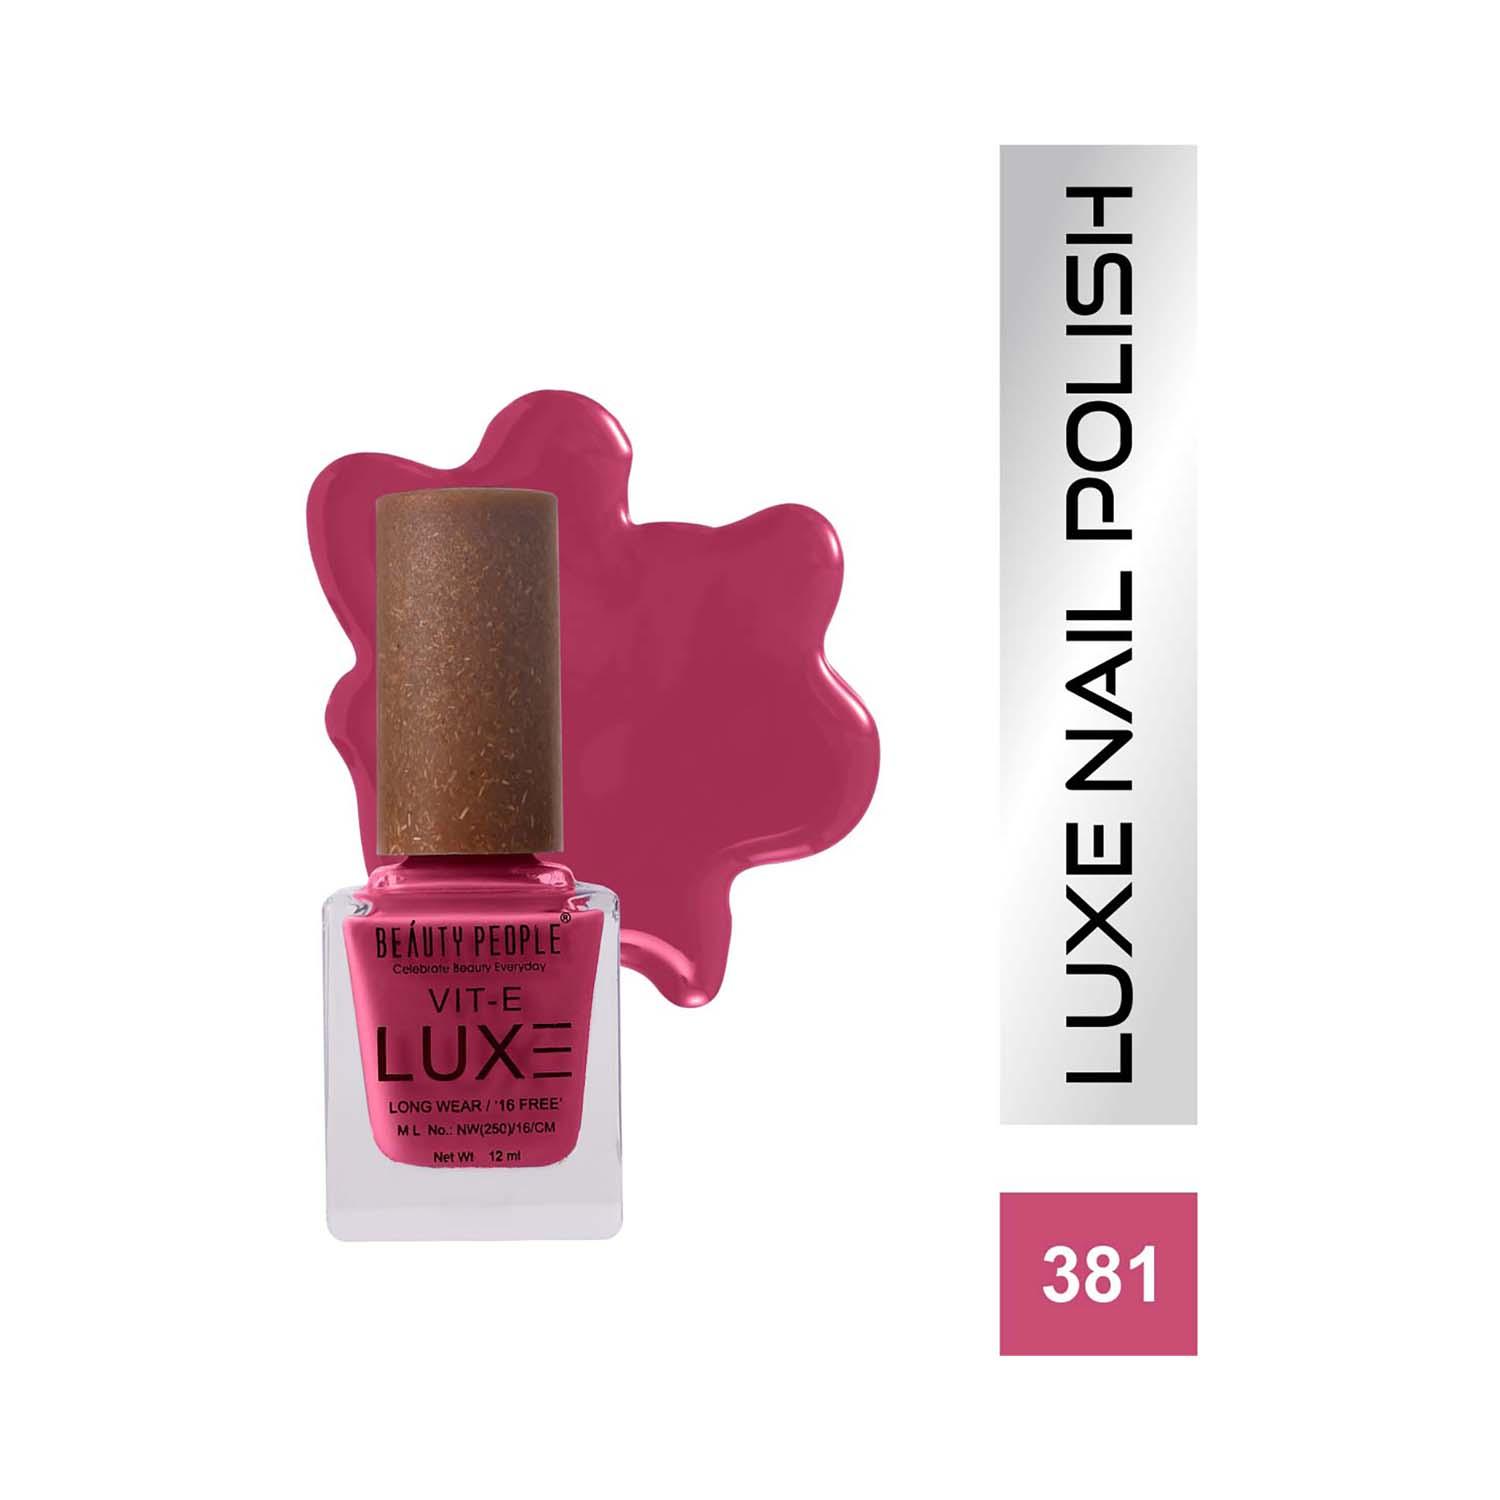 Beauty People | Beauty People Luxe Nail Polish with Vitamin E - 381 Profile Pink (12ml)